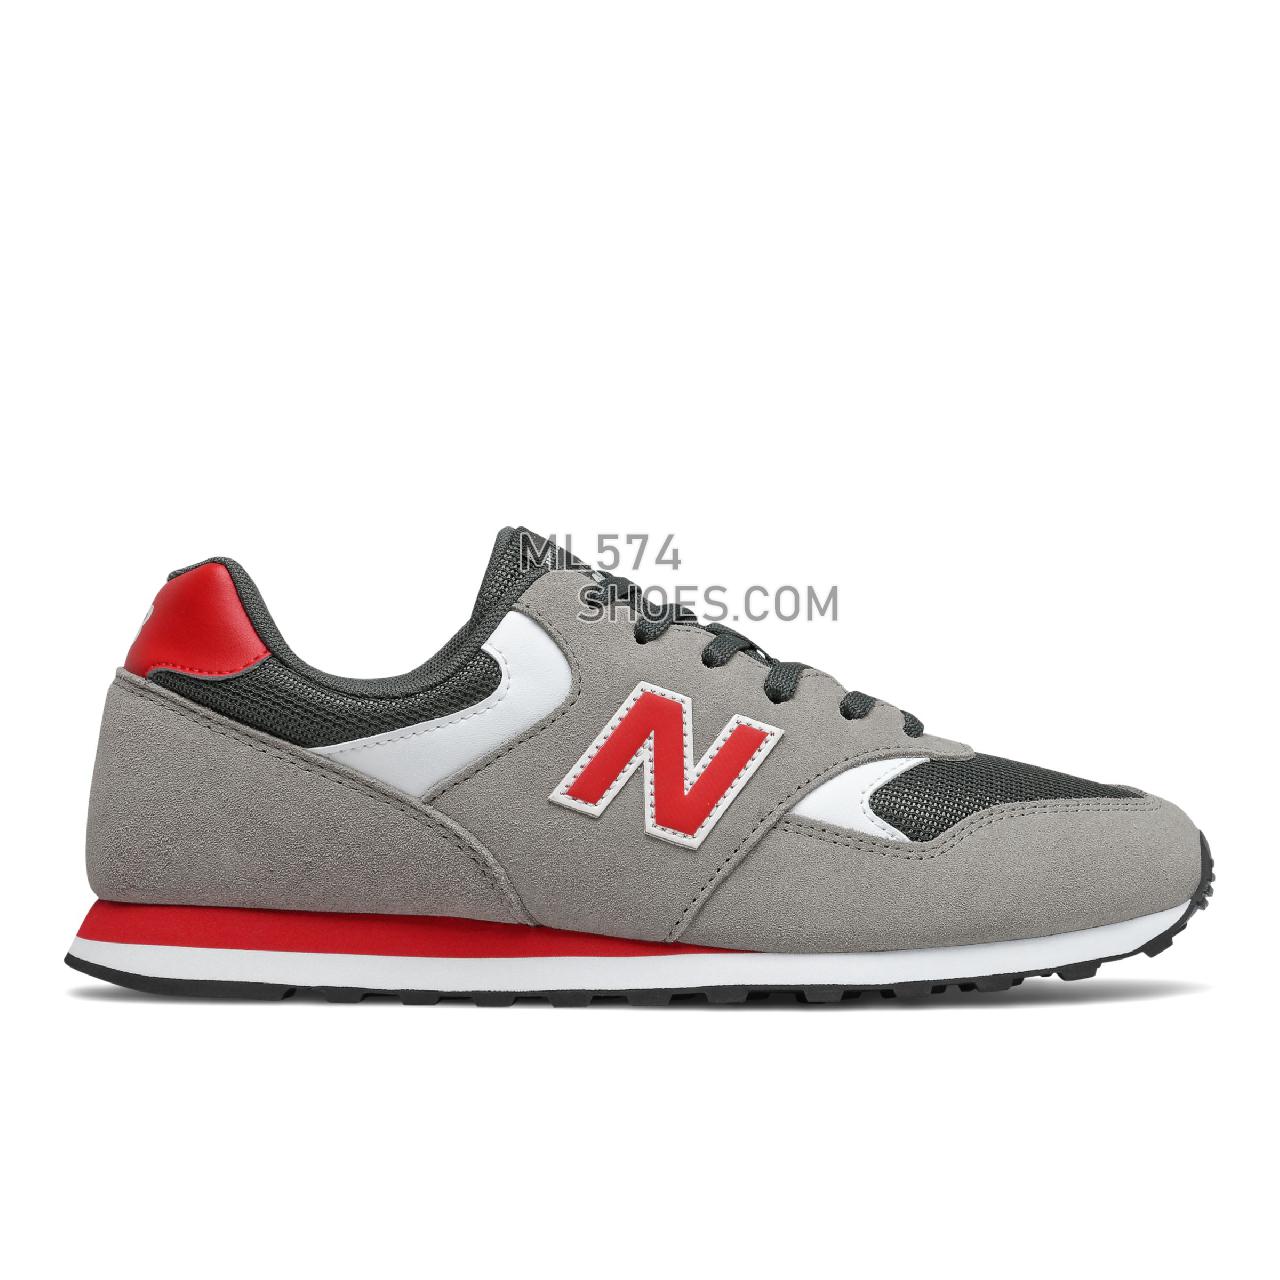 New Balance 393 - Men's Classic Sneakers - Marblehead with Team Red - ML393VT1